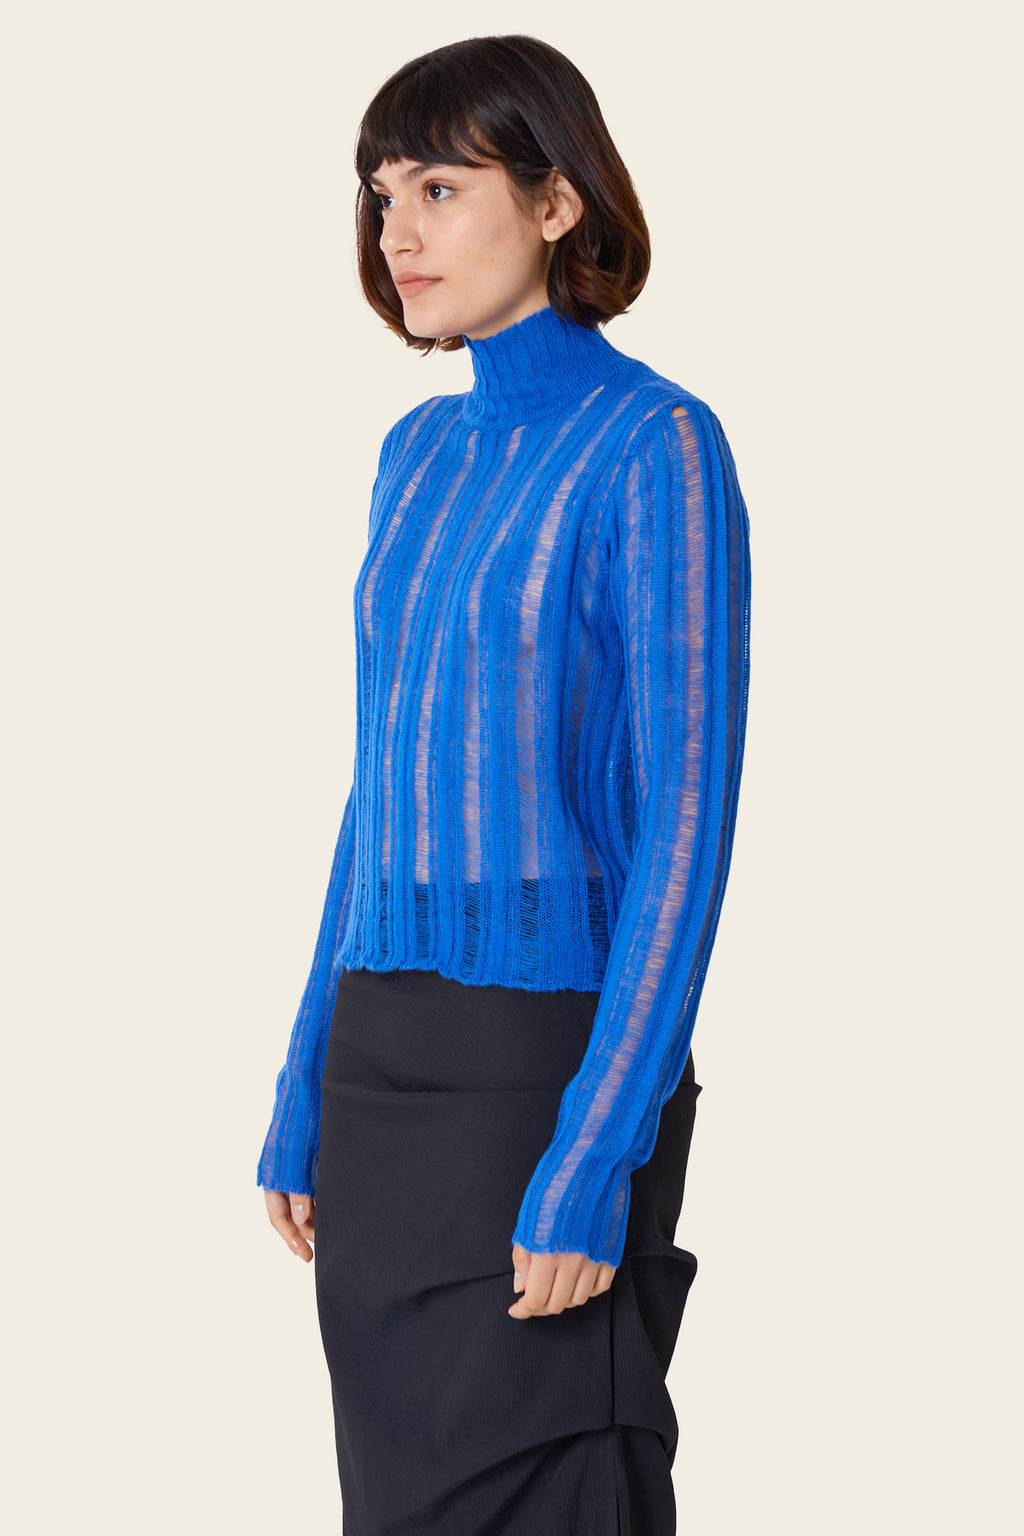 Willow Sweater Dazzling Blue